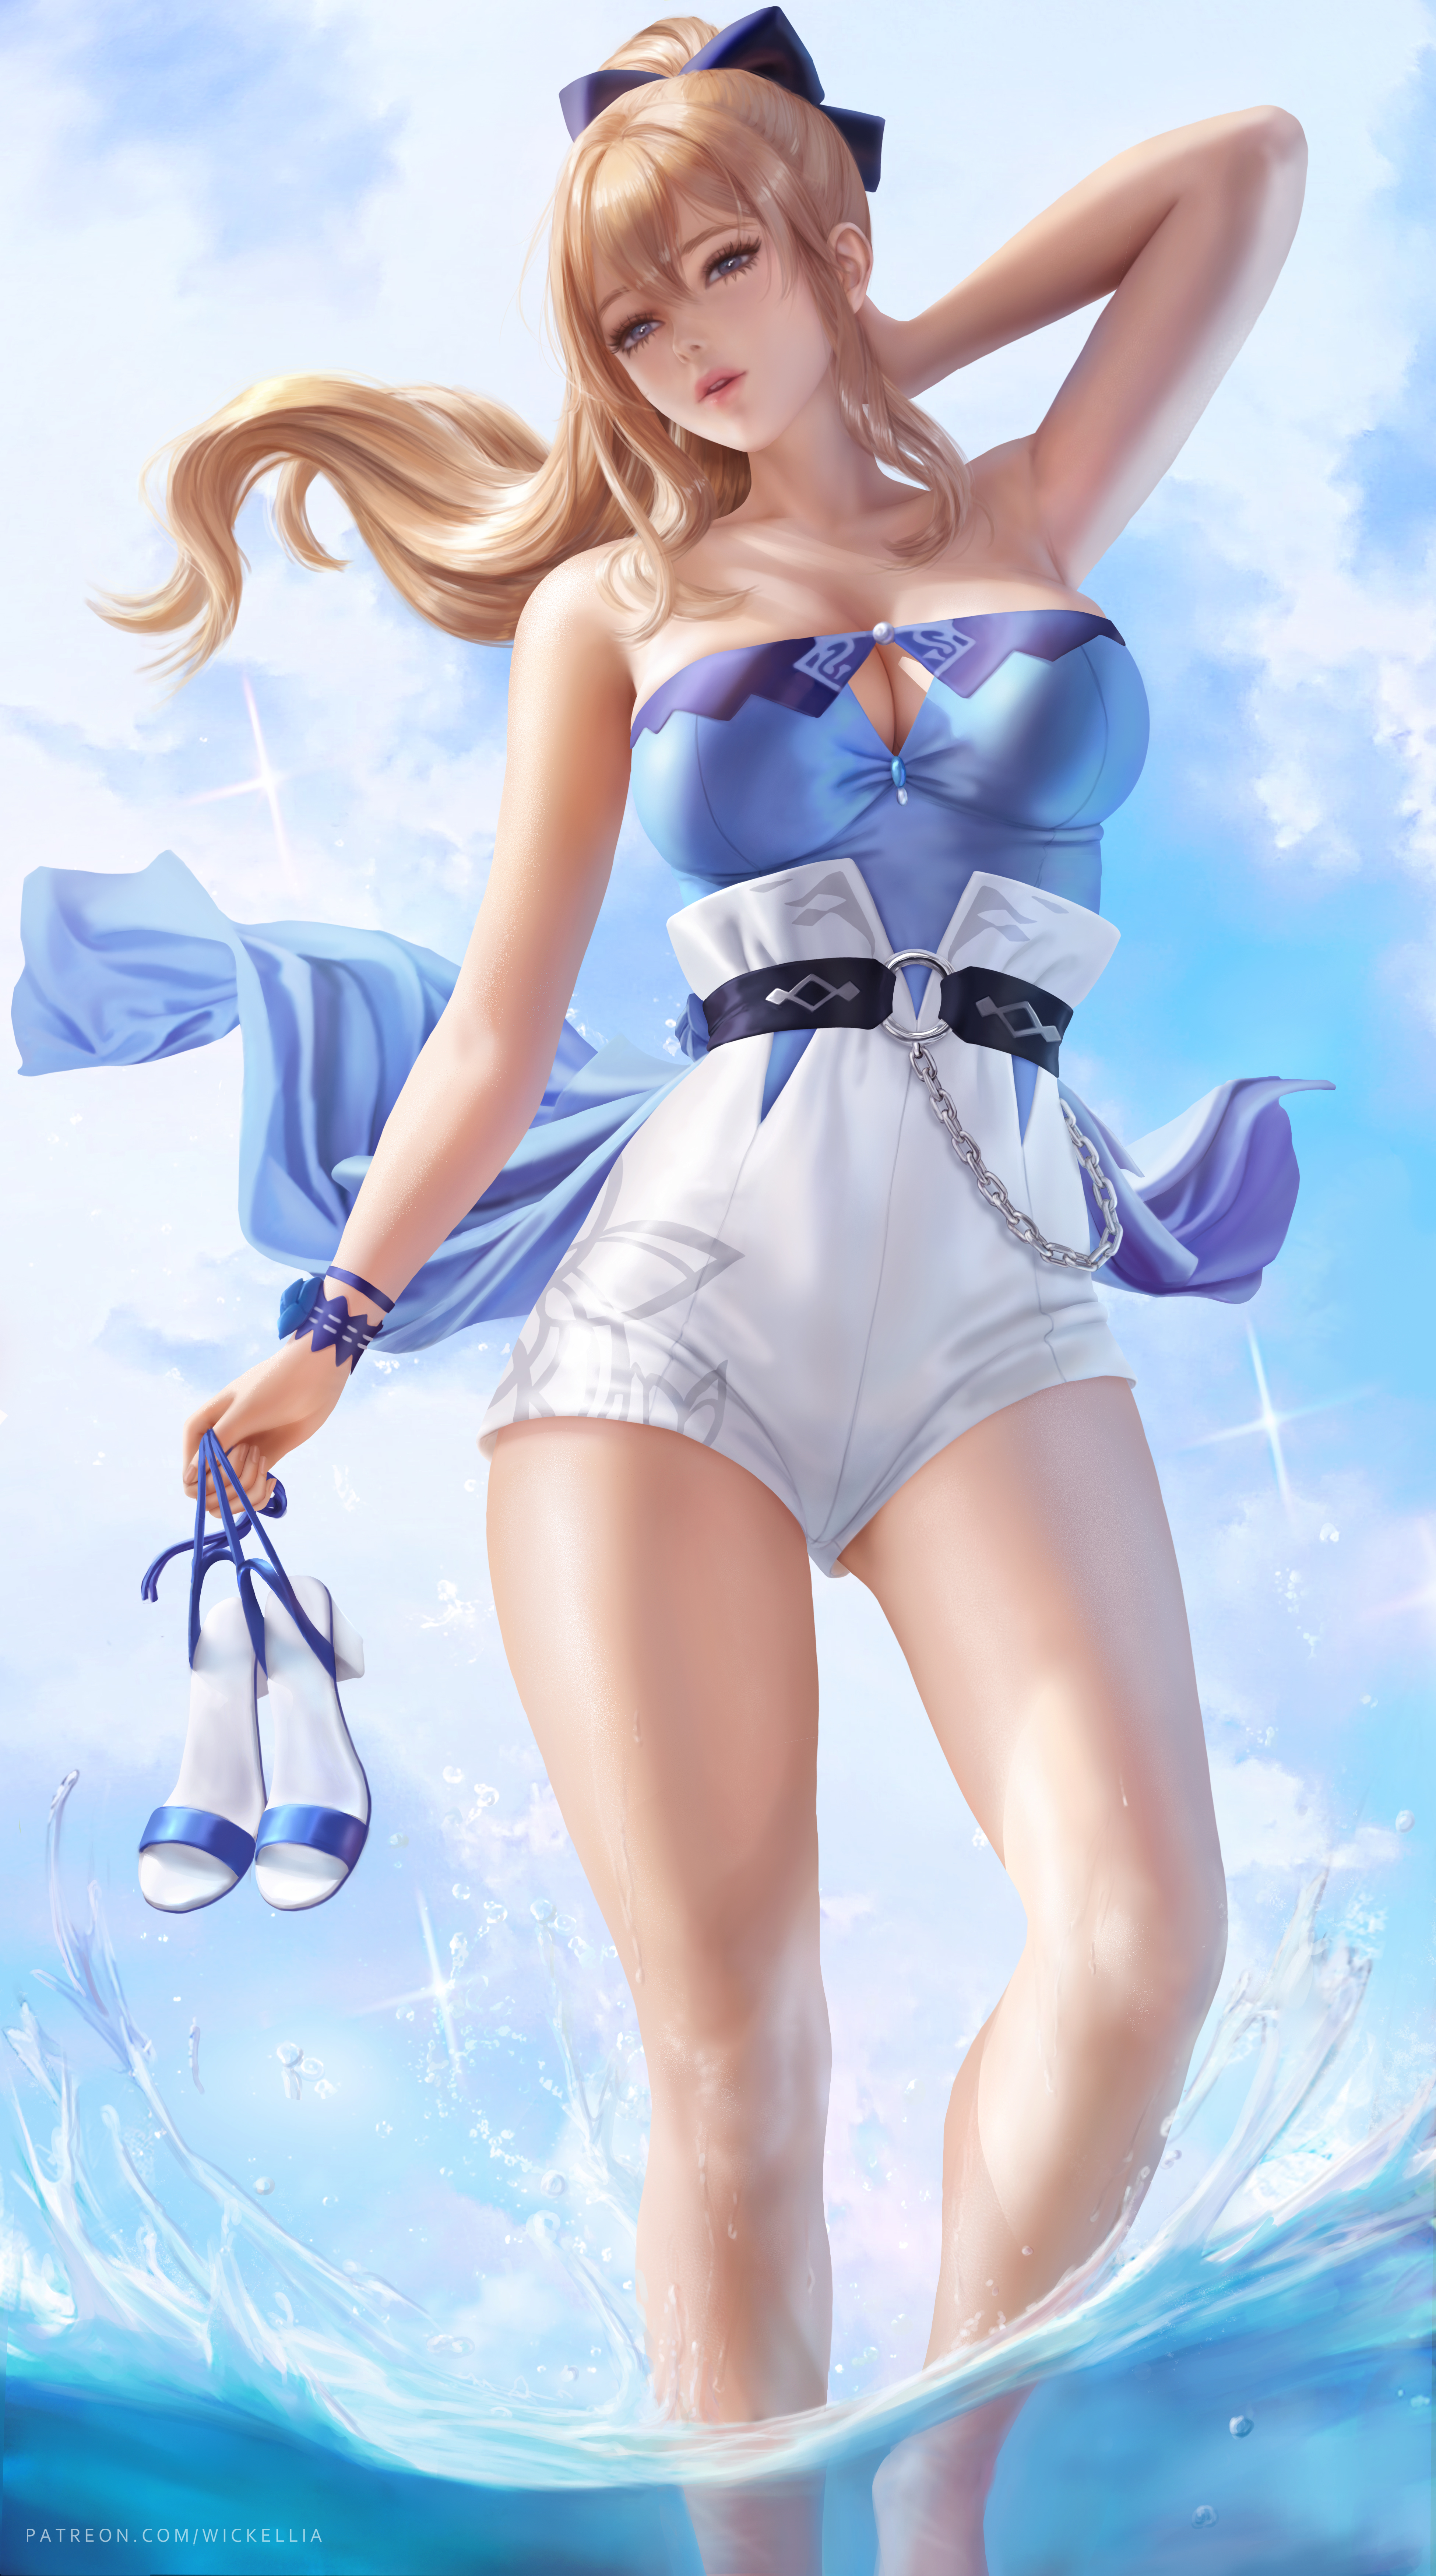 Anime 3900x6996 Jean (Genshin Impact) Genshin Impact video games video game girls anime anime girls blonde ponytail looking at viewer blue eyes parted lips summer sky clouds splashes sandals short shorts blue tops bare shoulders belt chains portrait display artwork drawing illustration fan art Wickellia